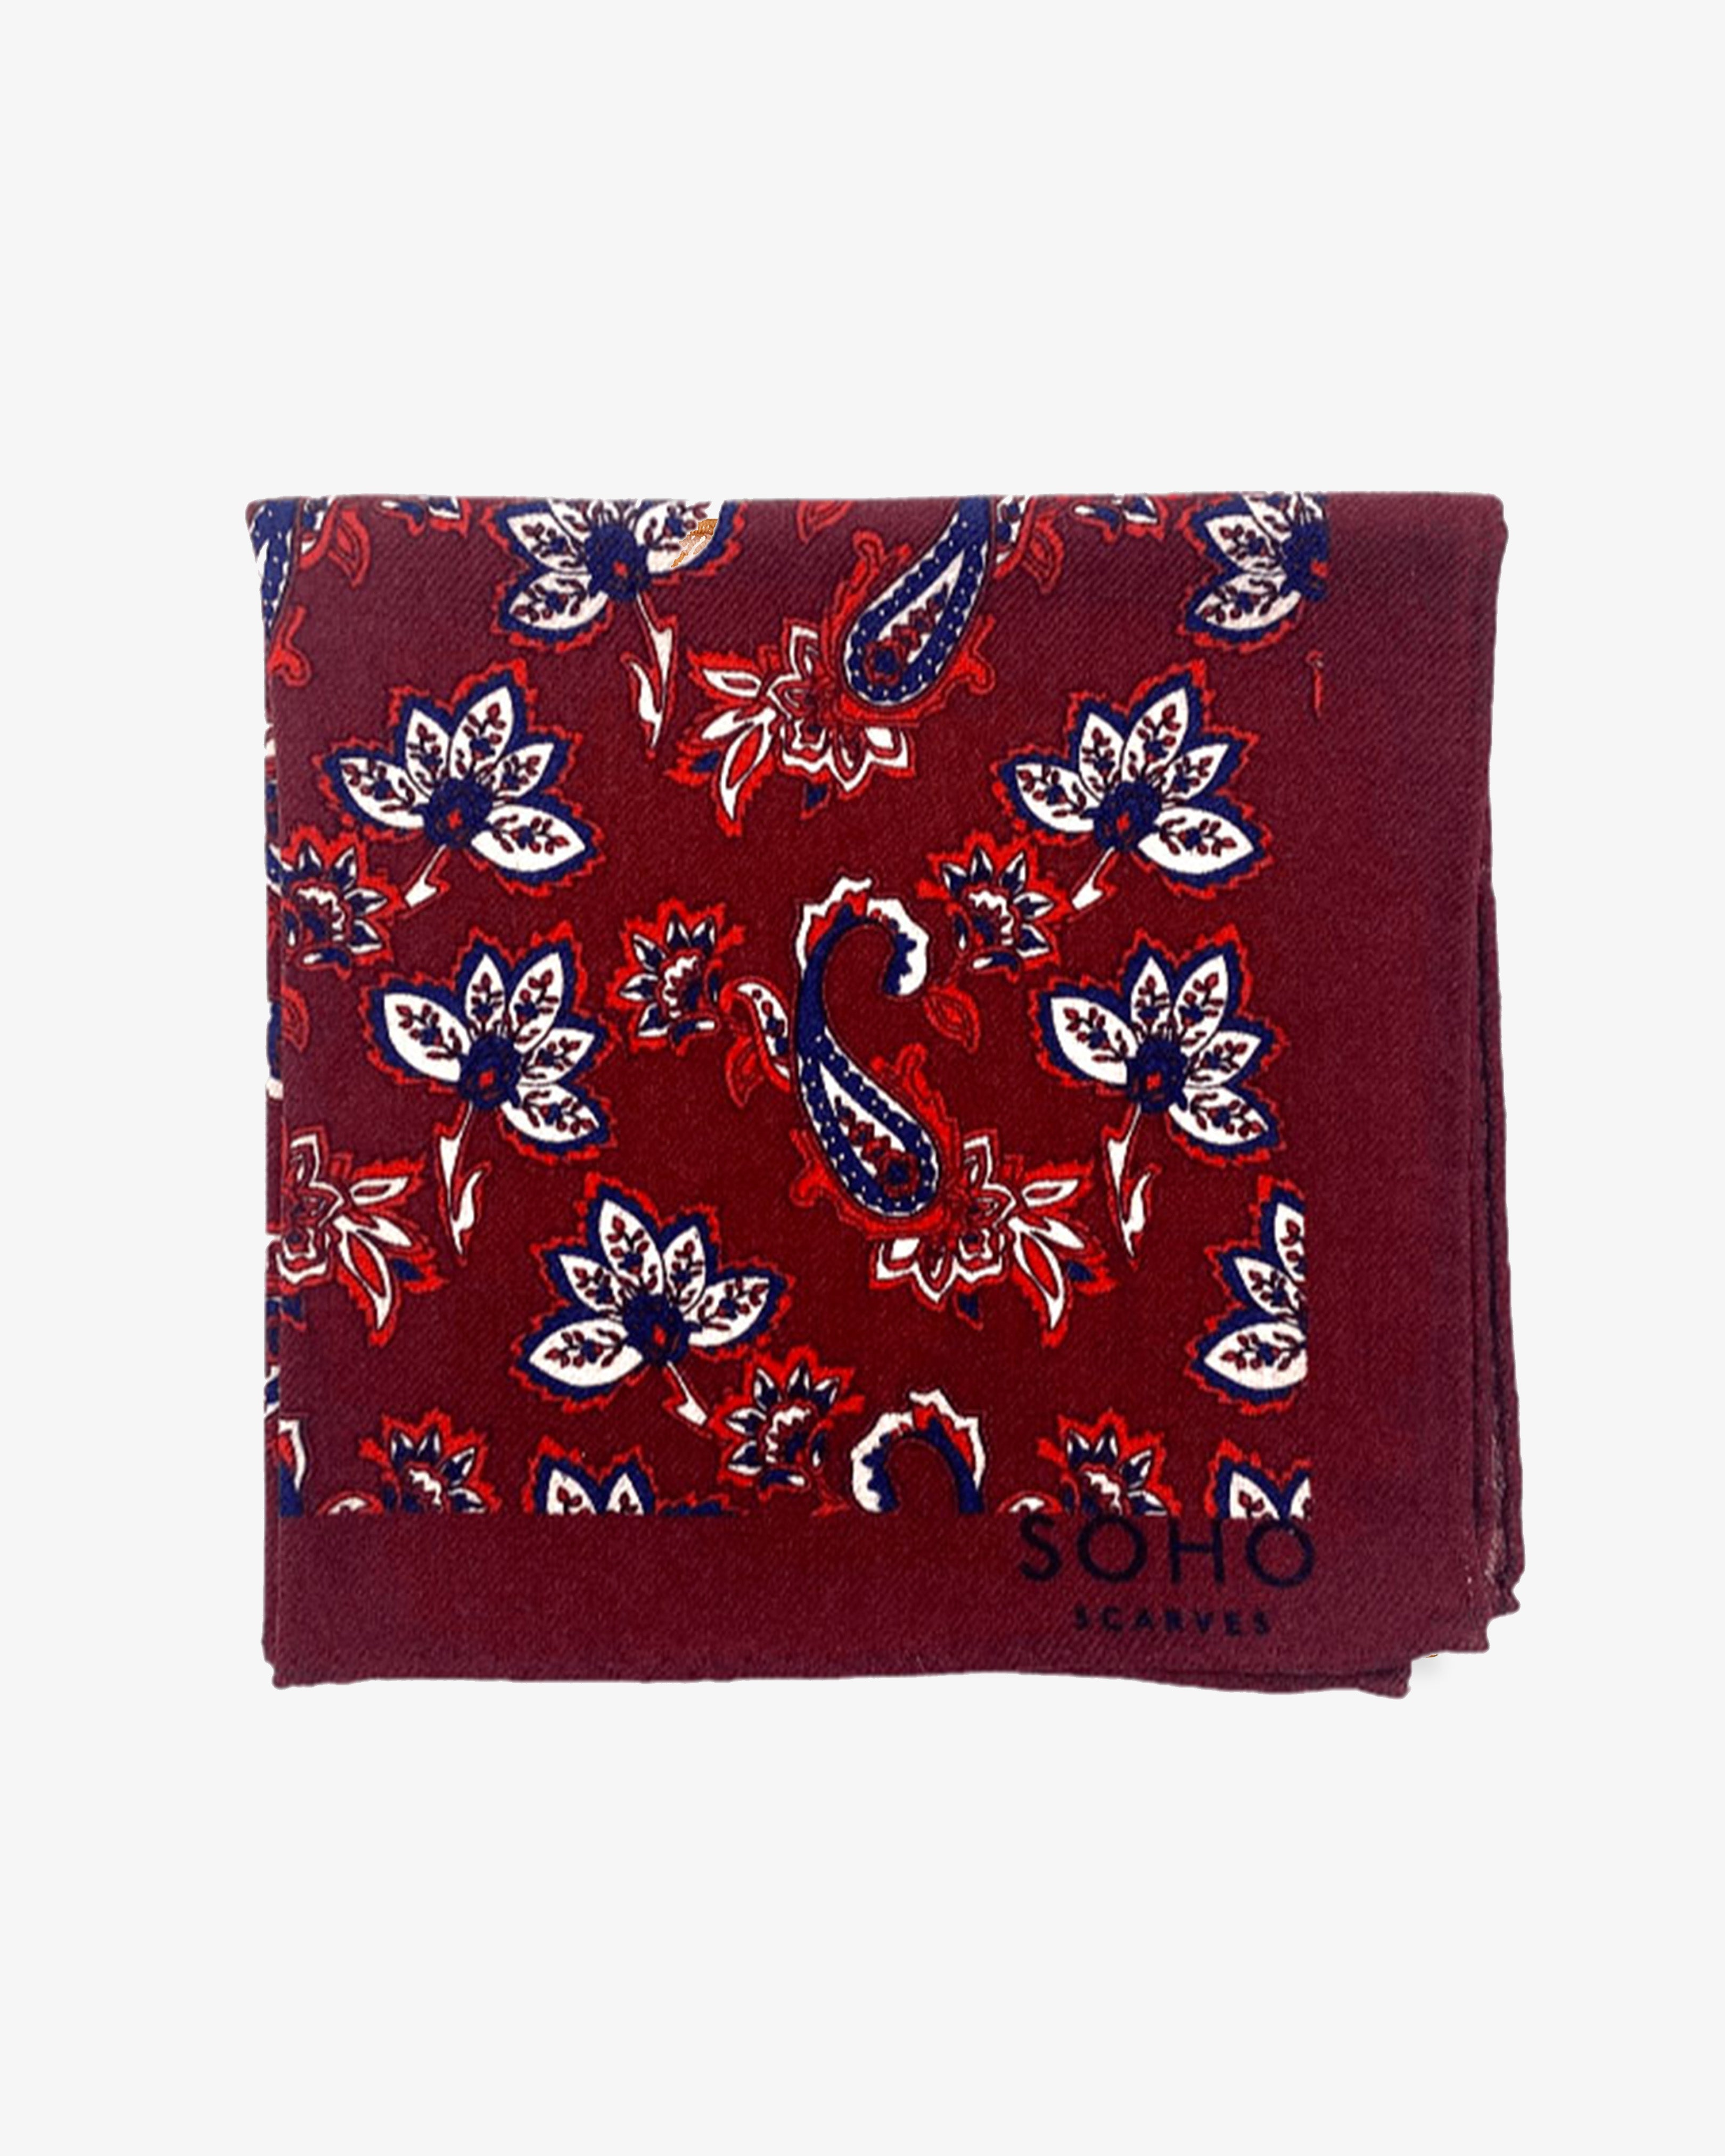 Men's Wool Floral Paisley Pocket Square - The Kovalam